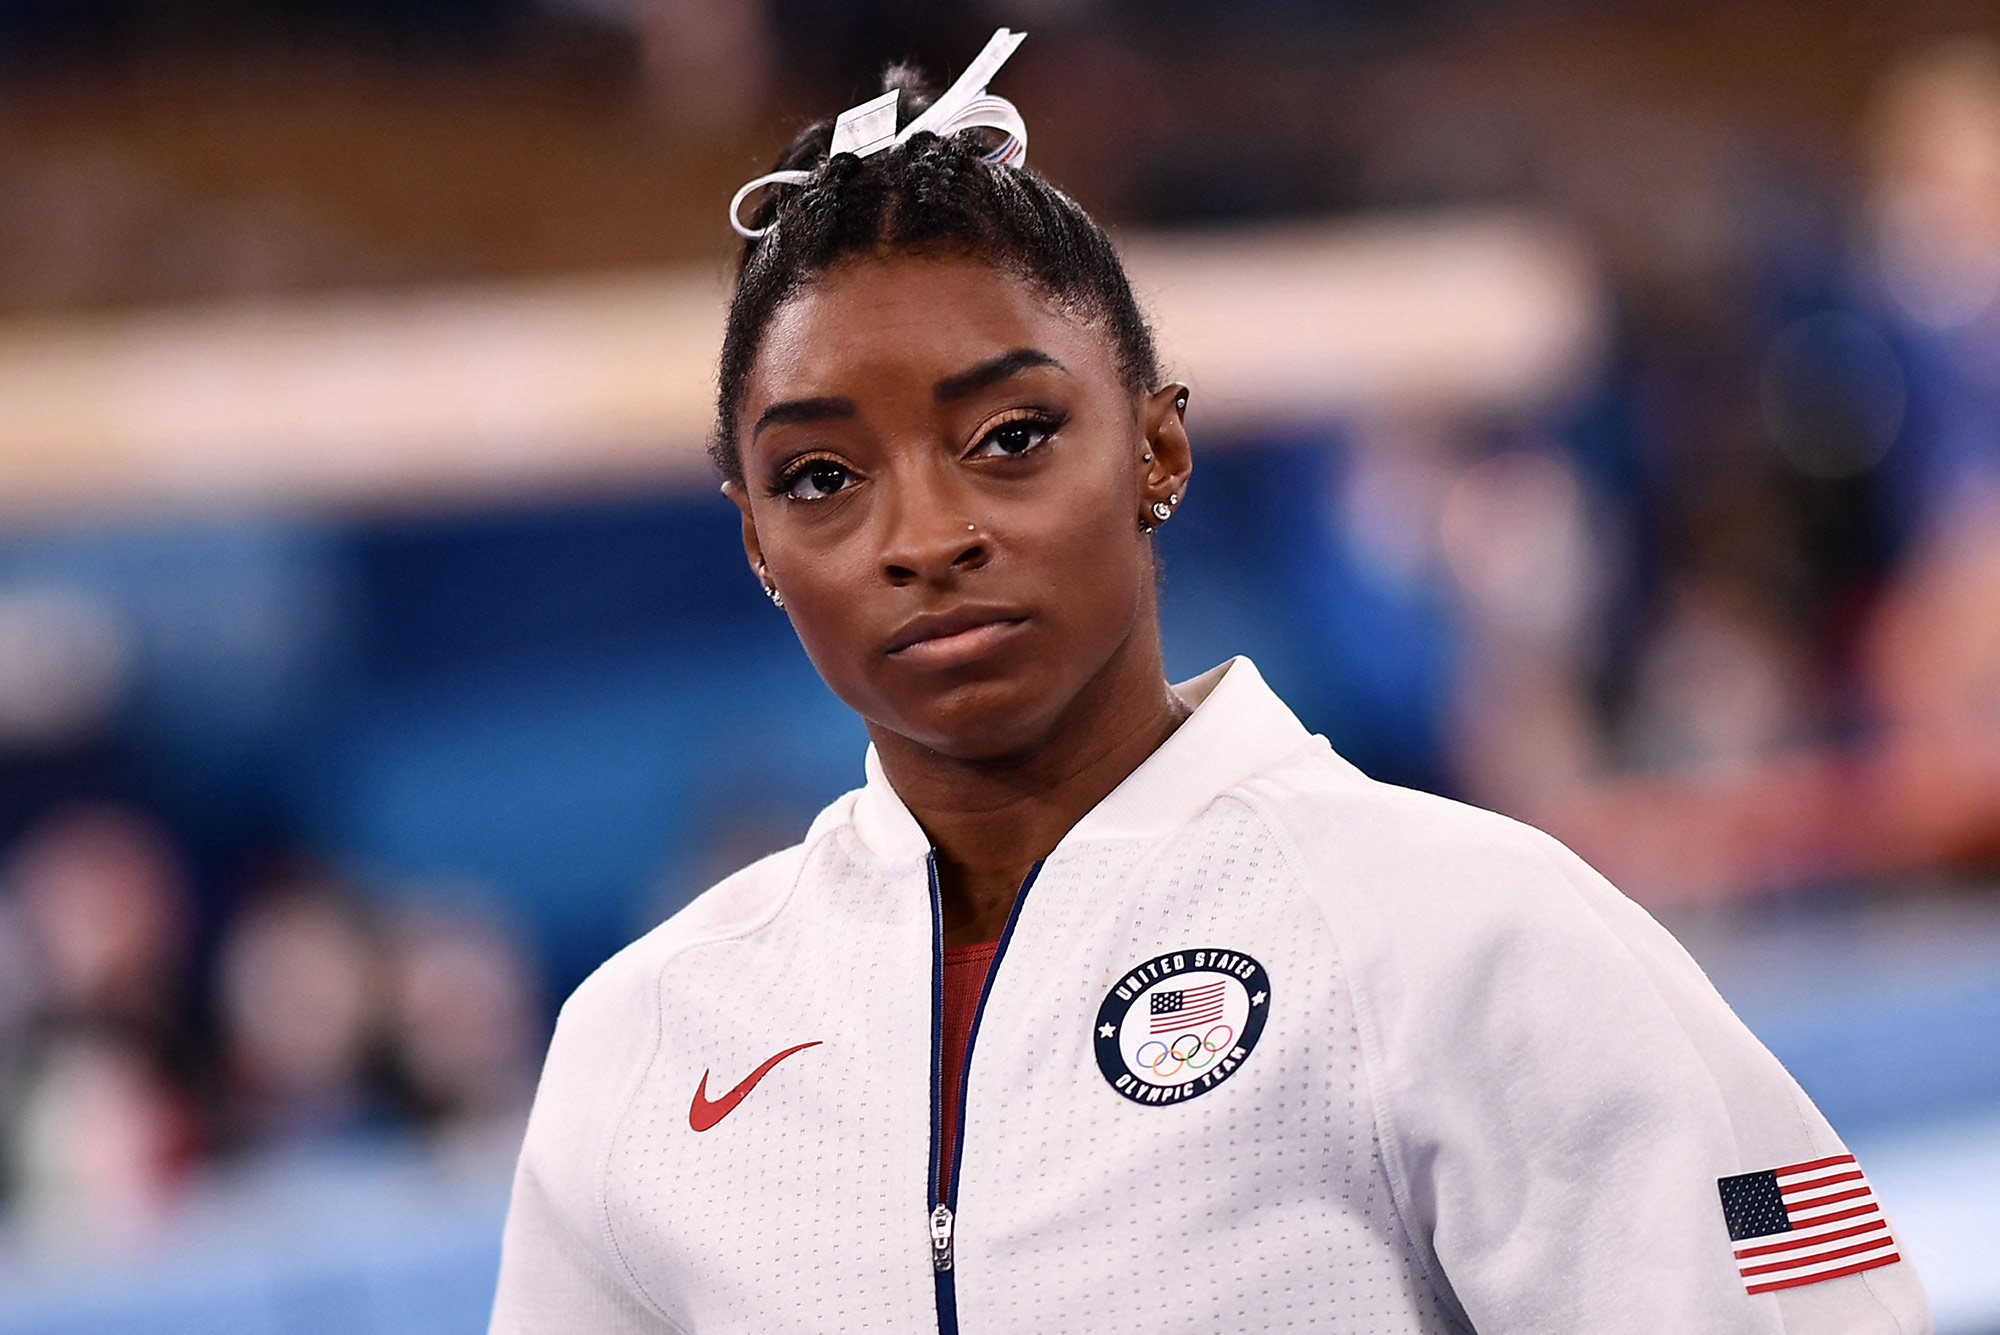 Photo of USA's Simone Biles, in her white USA sweatsuit, looking a little somber as she waits for the final results of the artistic gymnastics women's team final during the Tokyo 2020 Olympic Games at the Ariake Gymnastics Centre in Tokyo on July 27, 2021.